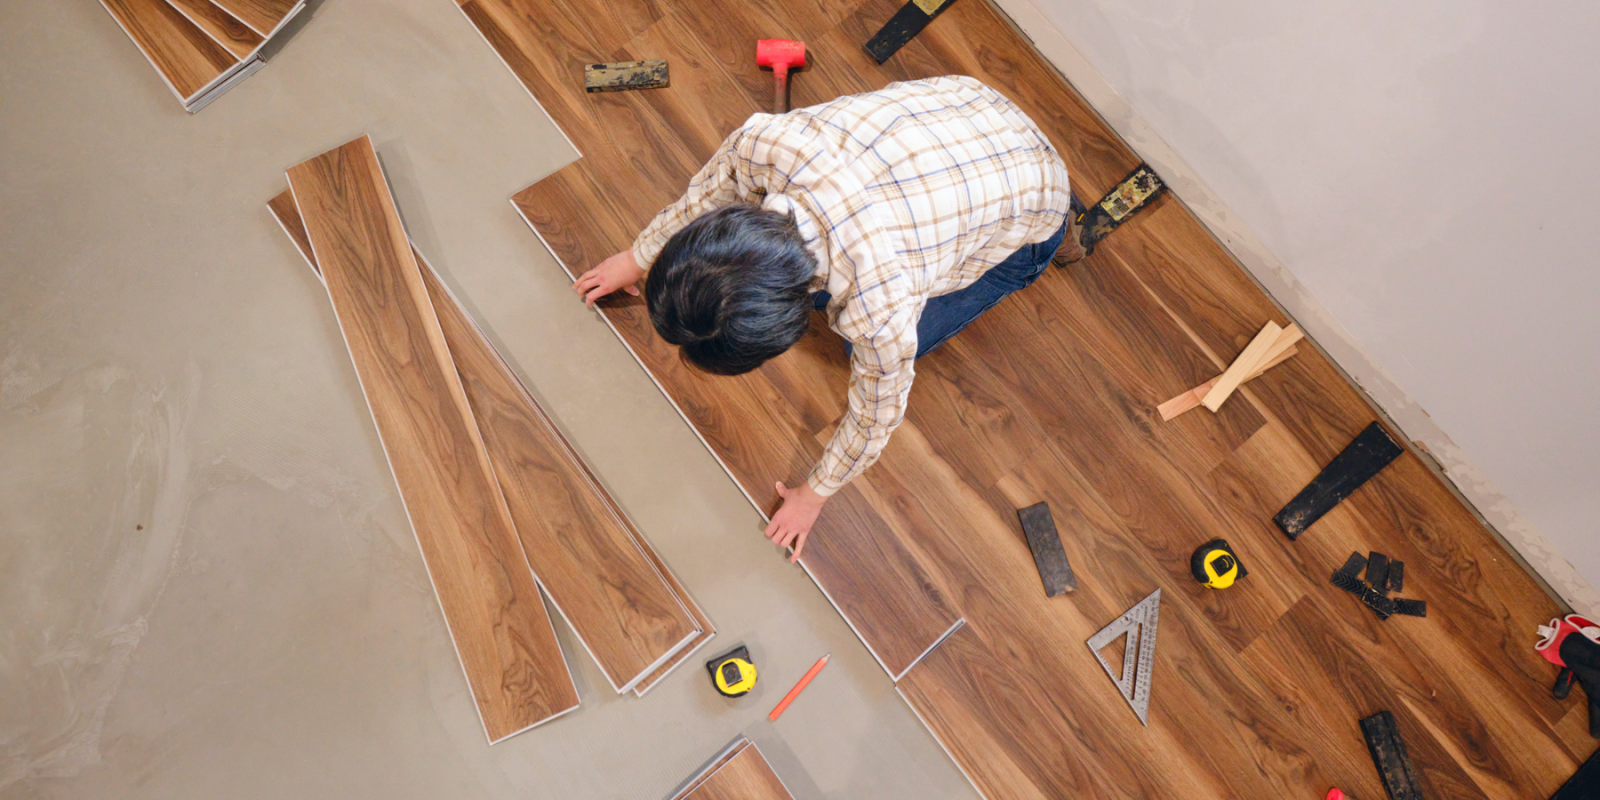 Specialized installation tools play a key role in DIY flooring installation